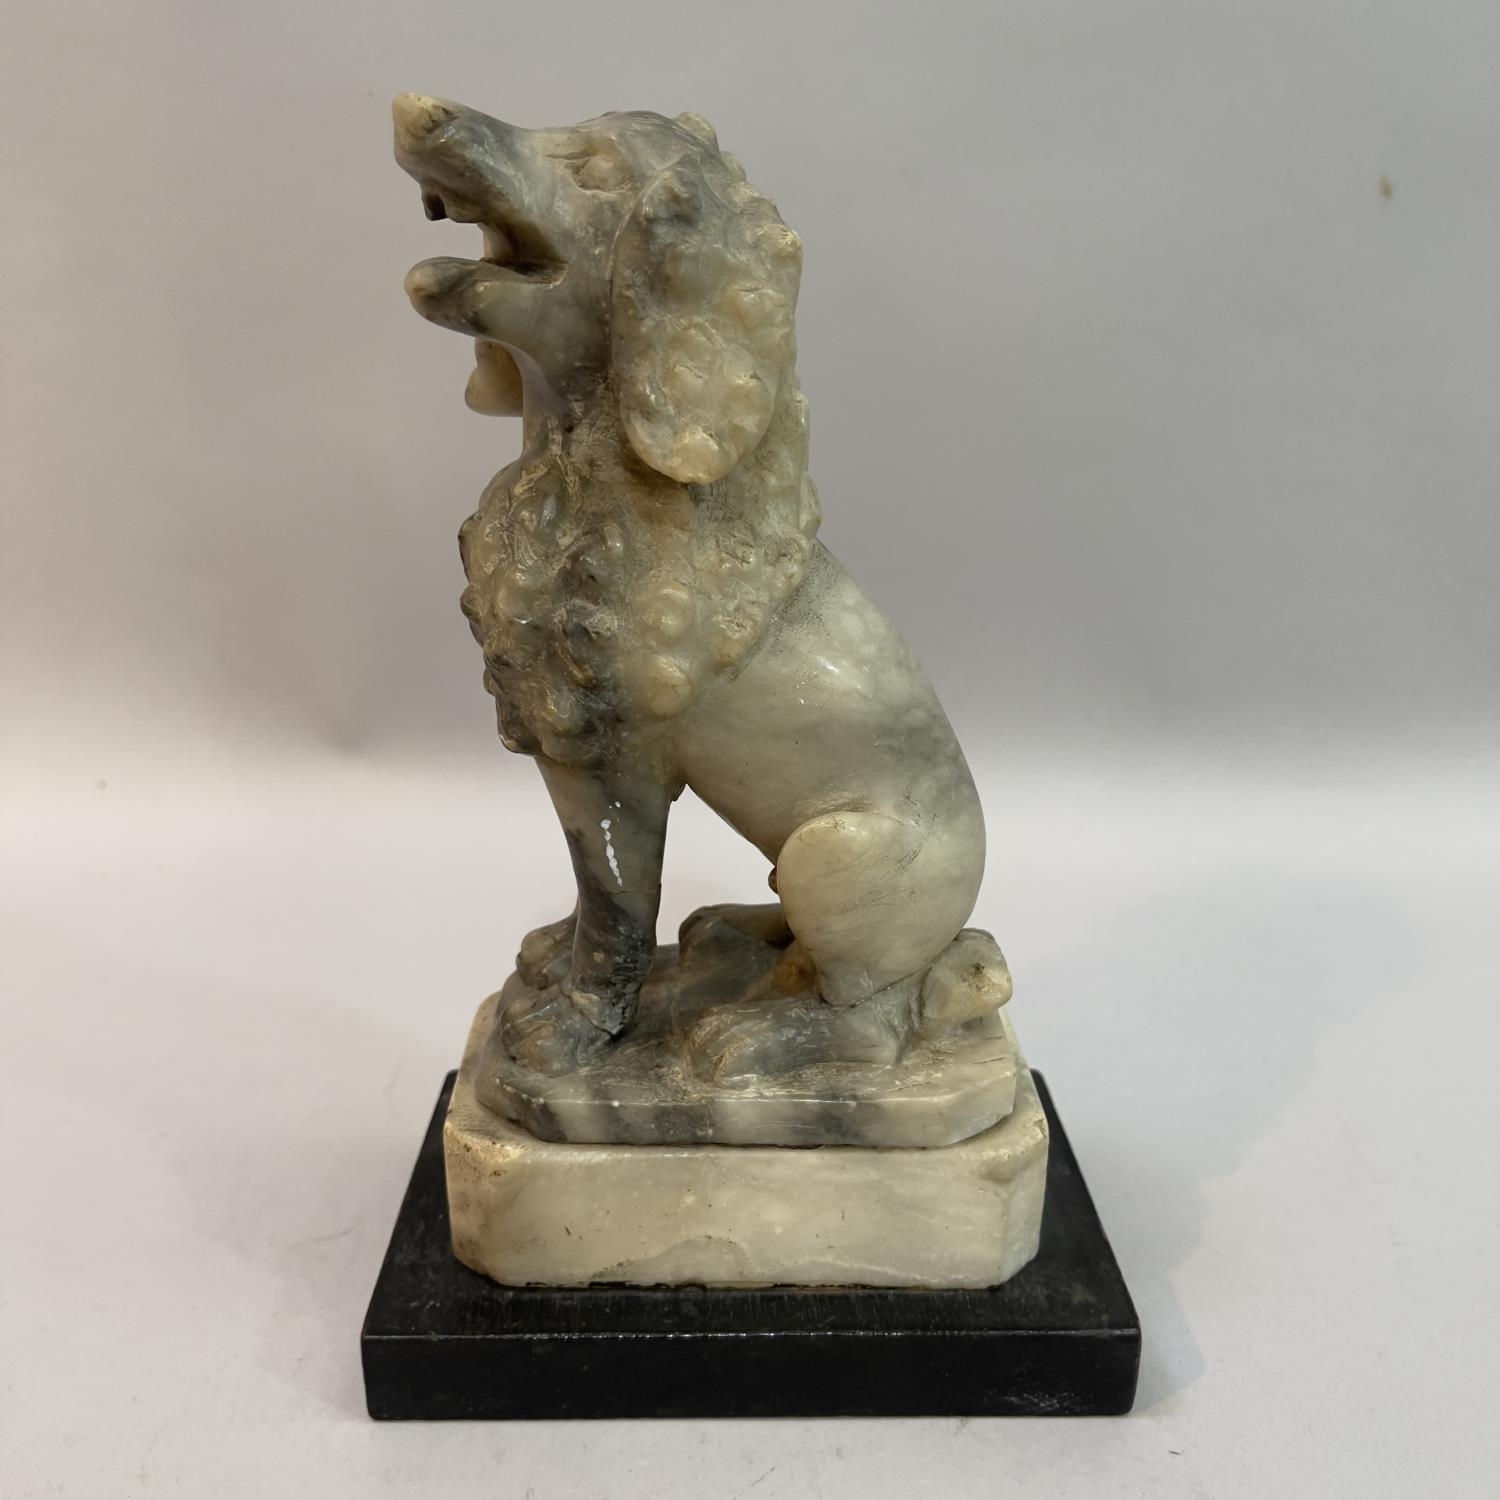 An alabaster carved figure of a poodle, mouth open, upon plinth on ebonised base, 19cm high